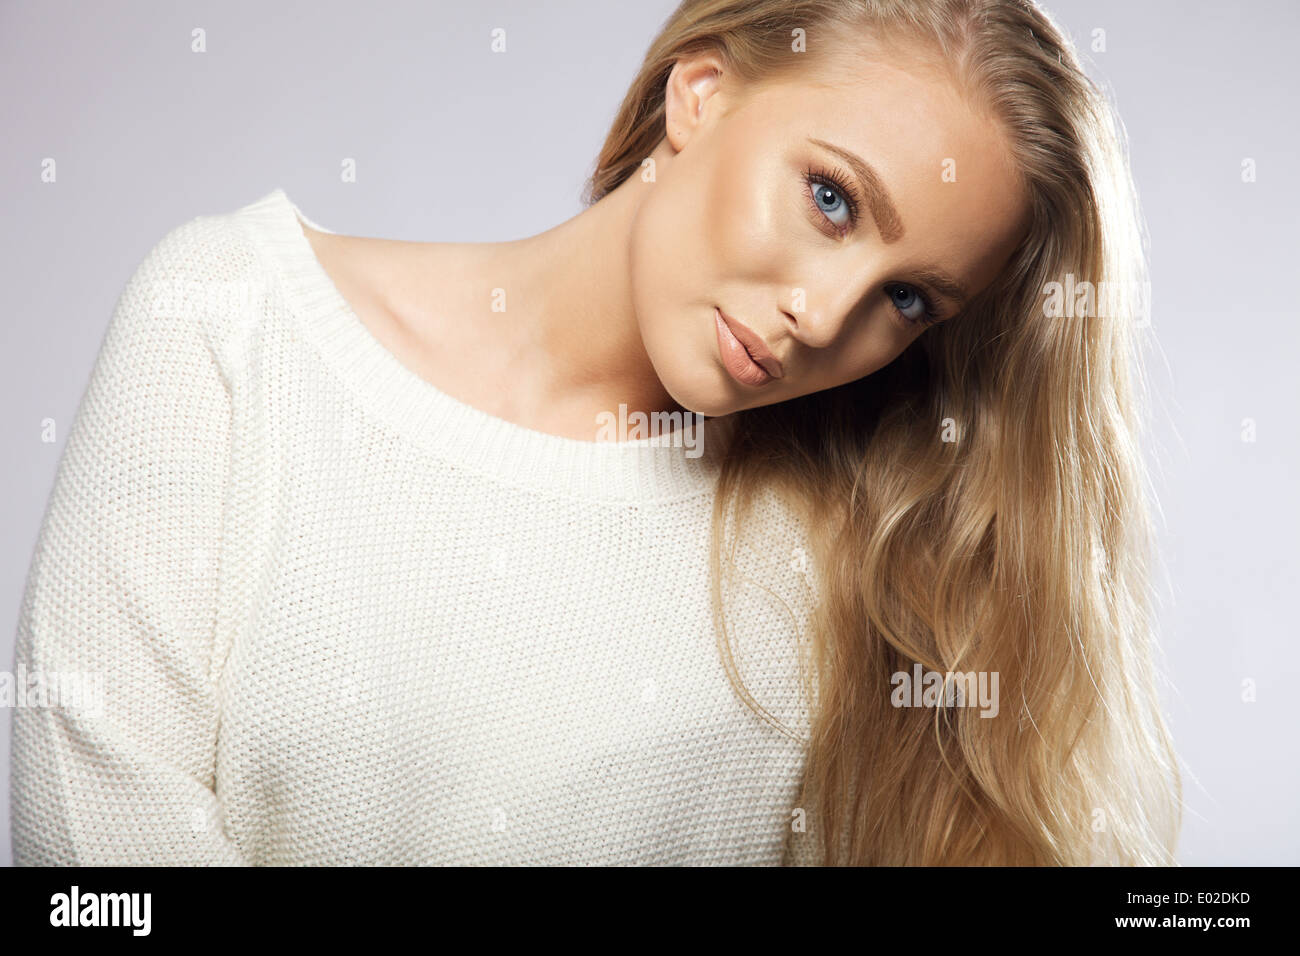 Close up portrait of young woman with long hair looking at camera. belle femme fashion model wearing white sweater. Banque D'Images